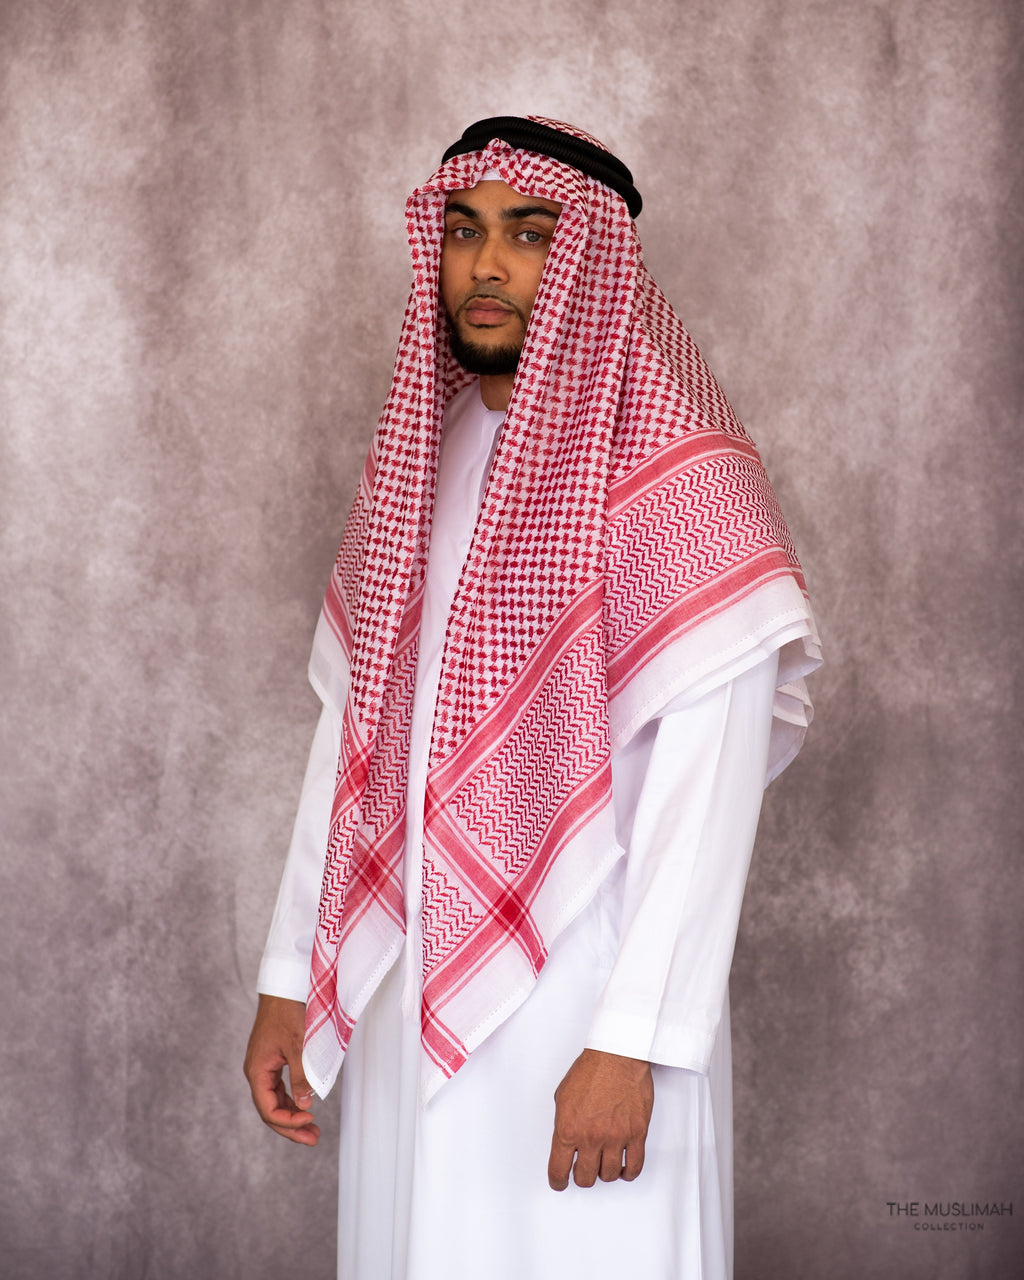 Classic Red and Imamah/Shemagh/Keffiyyah Arab Men's Scarf